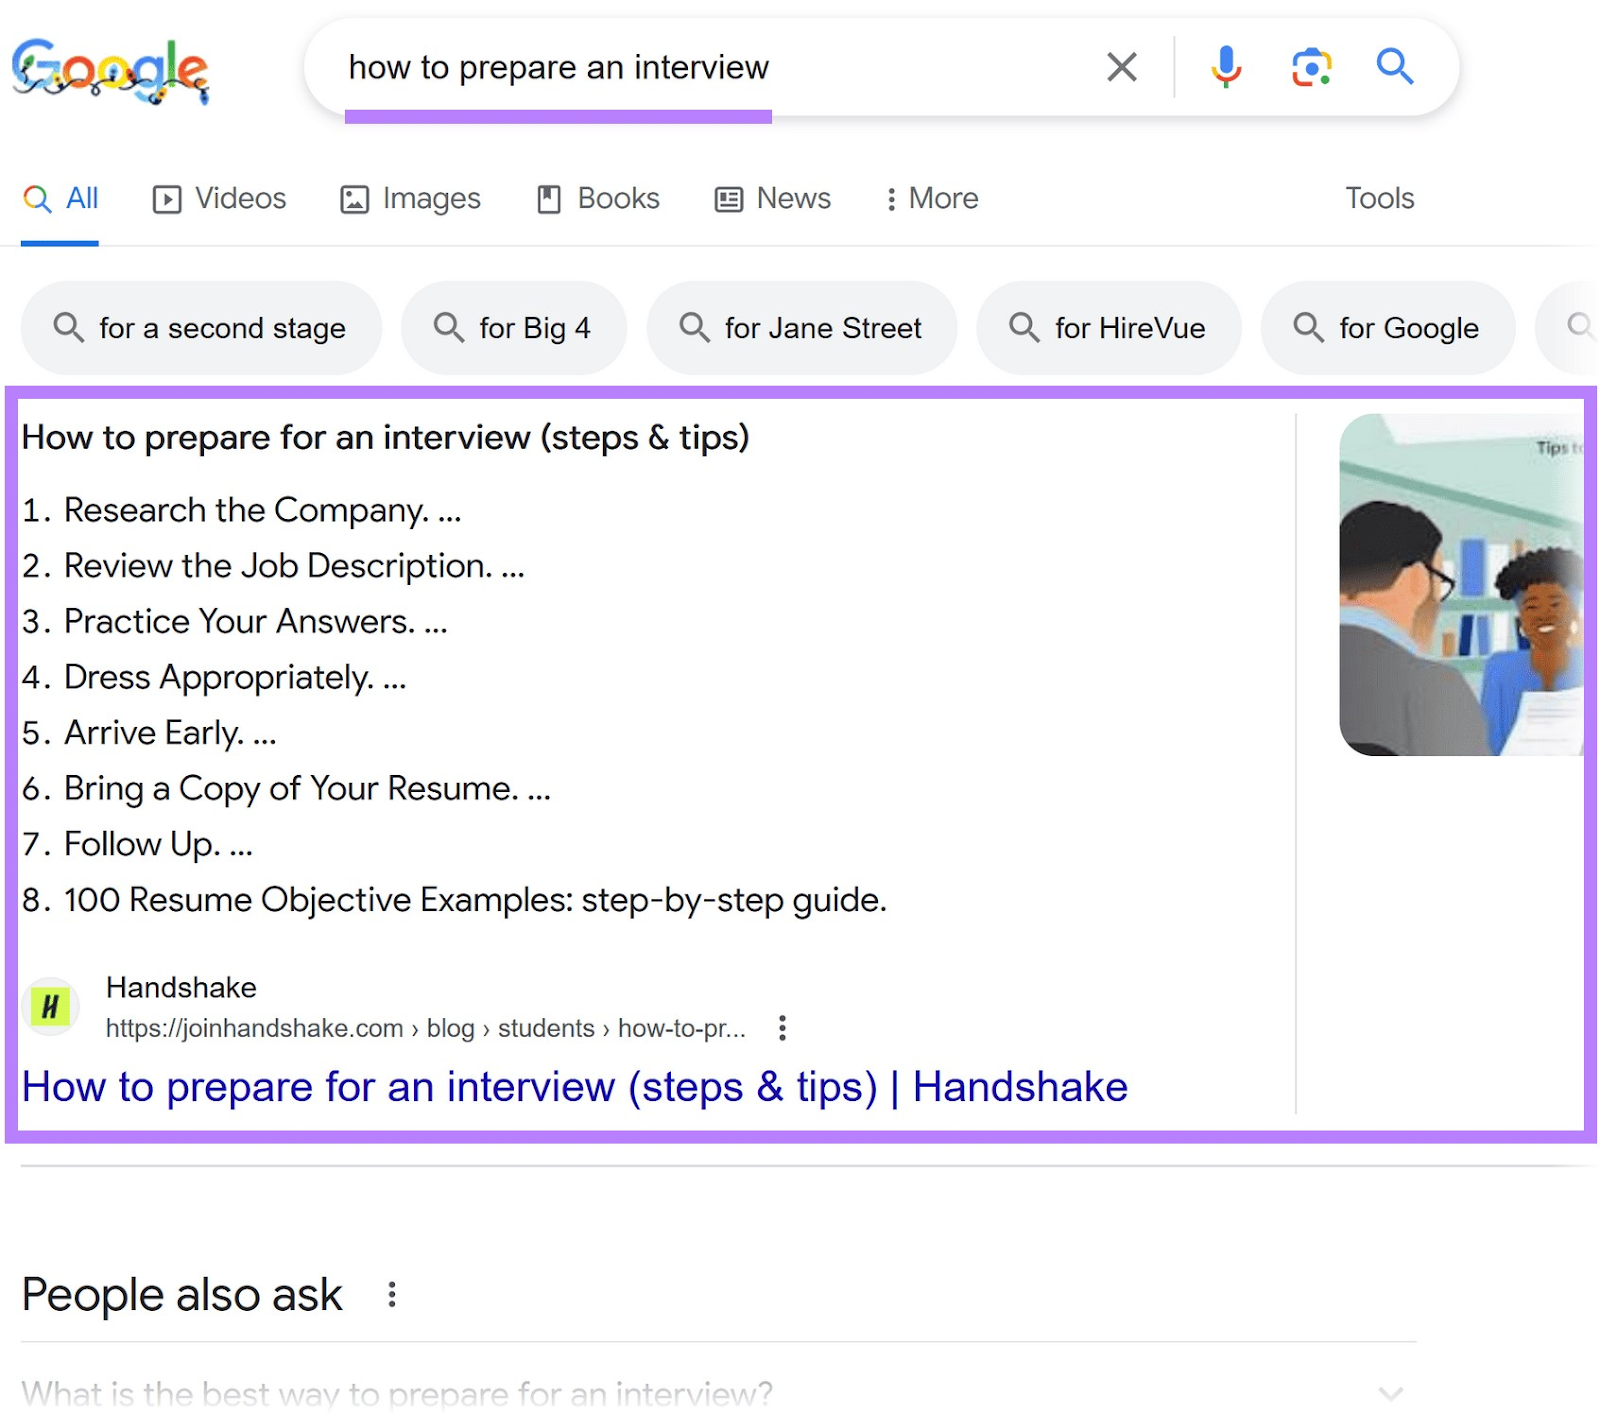 A featured snippet for “how to prepare an interview” on desktop